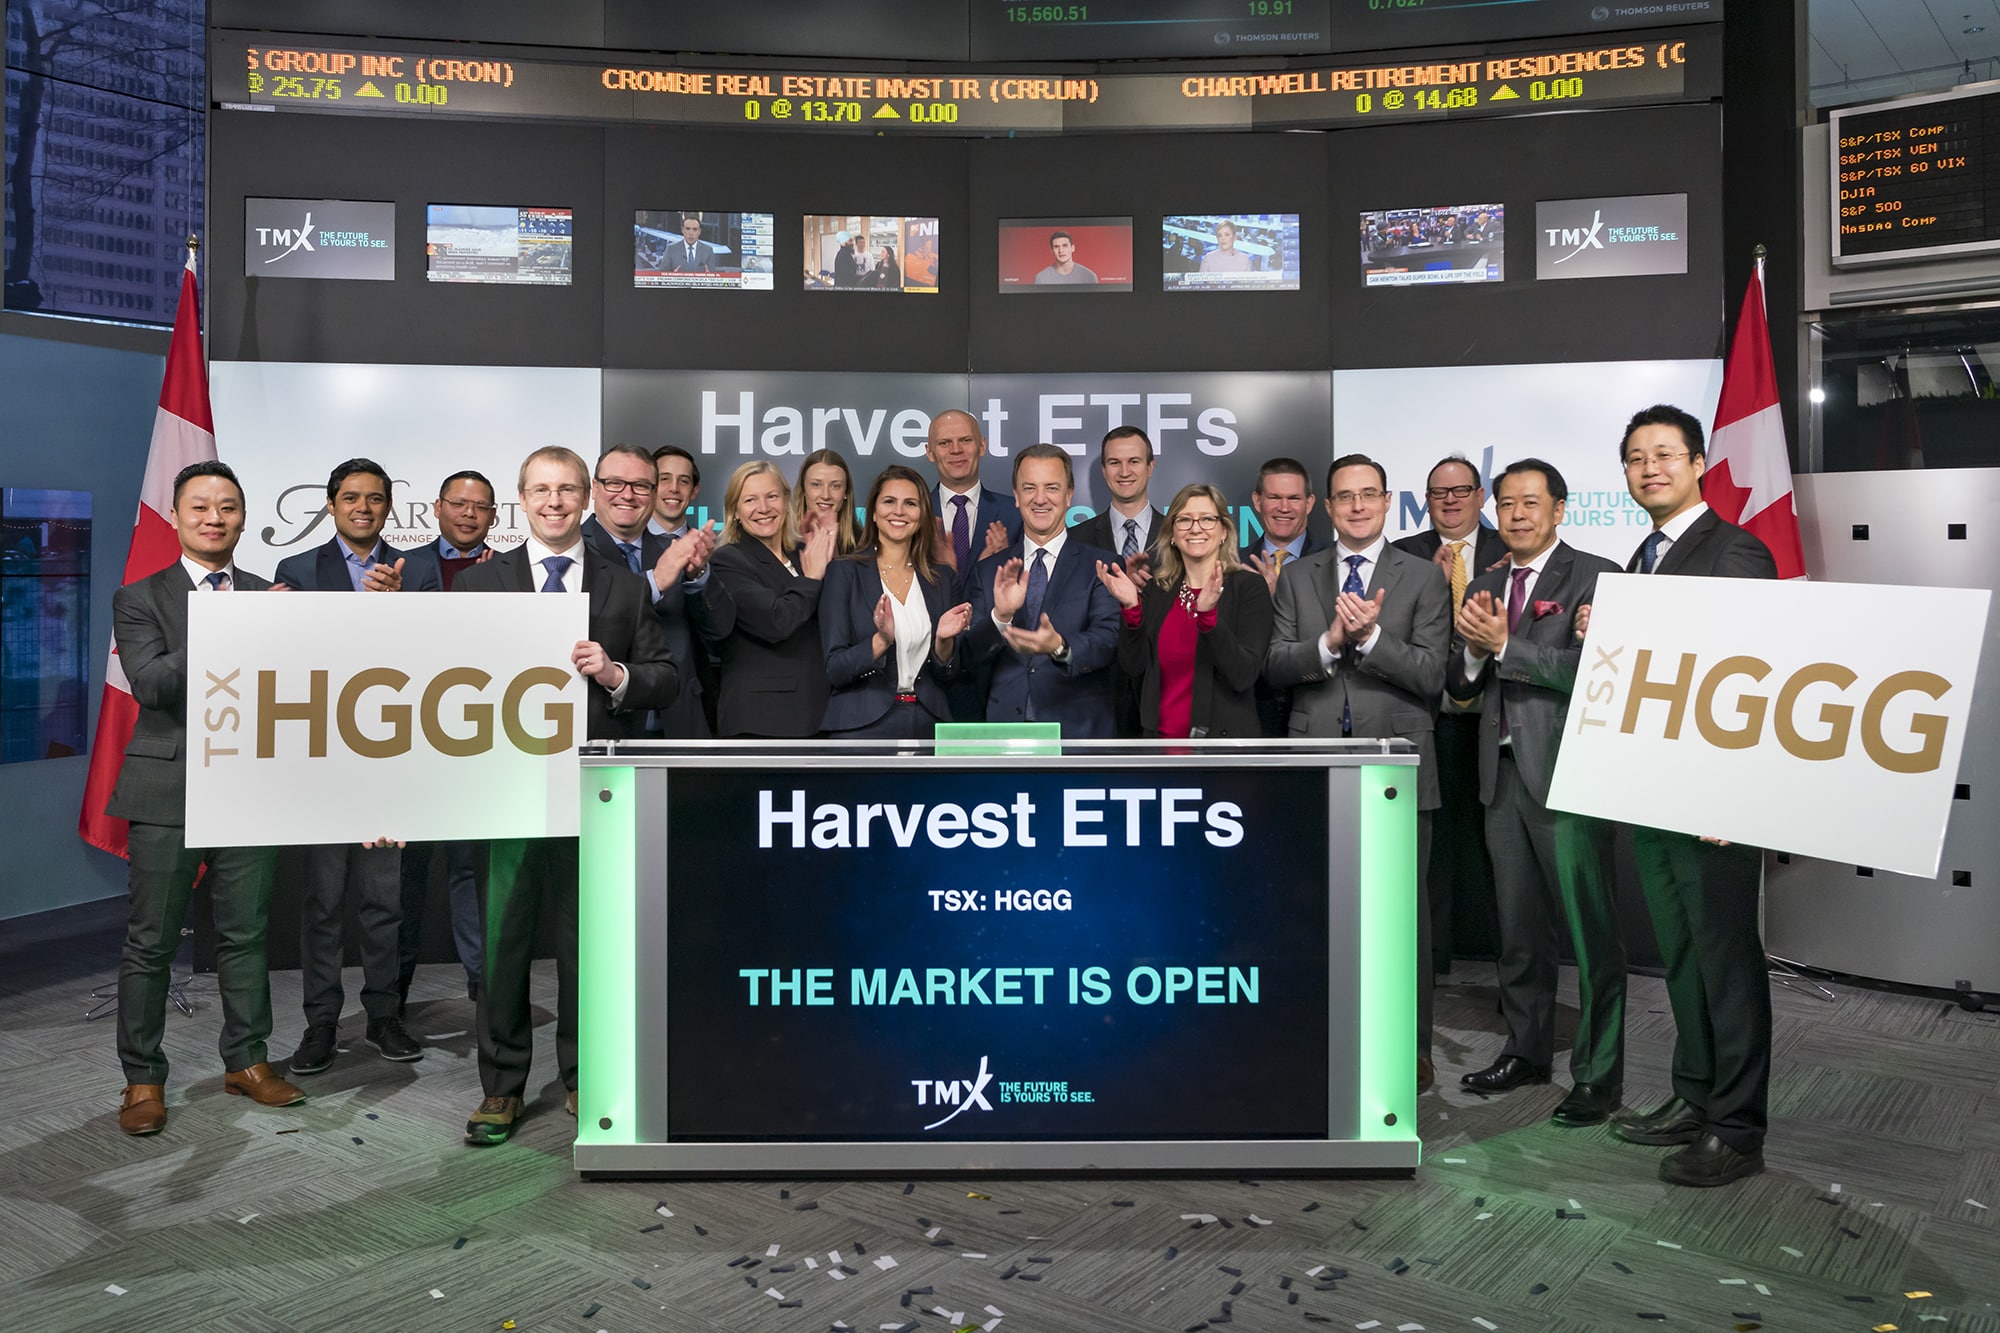 Harvest ETFs opened the market to celebrate the launch of the Harvest Global Gold Giants Index ETF (TSX: HGGG).